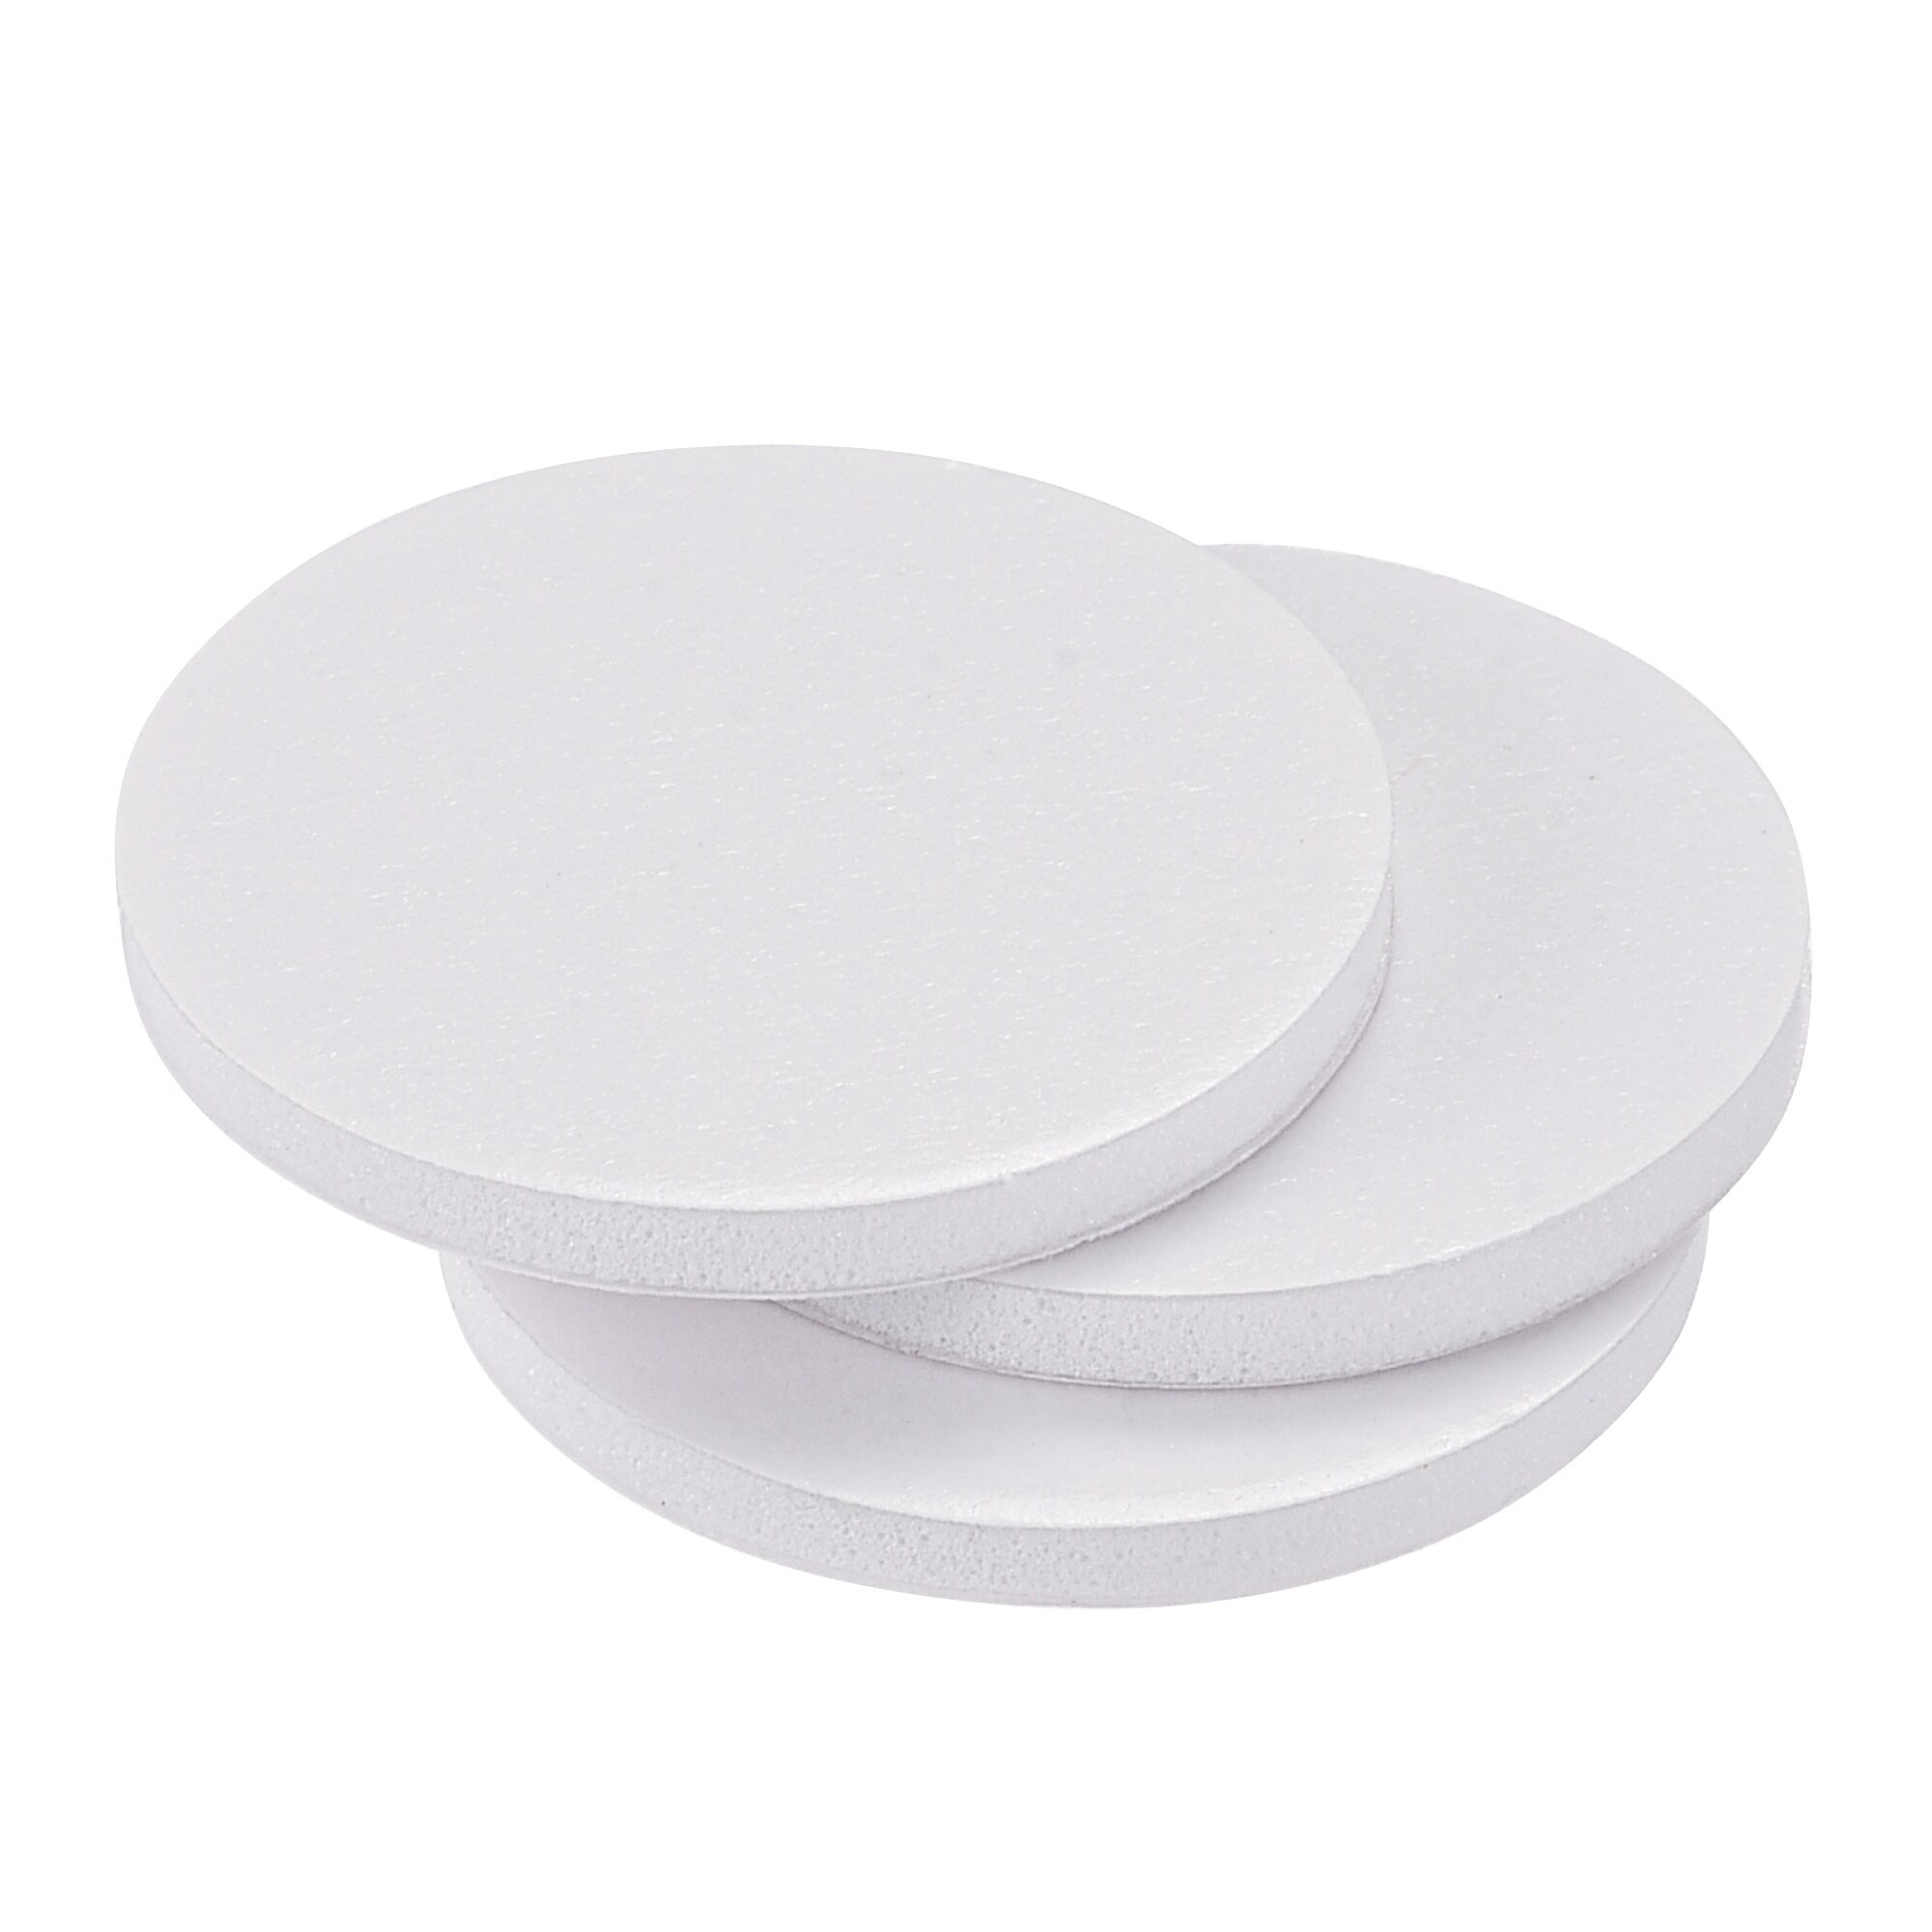 Double Sided Sticky Pads White 40mm x 40mm 40 Pcs Adhesive Sticky Foam Pads Mounting Tape Squares 